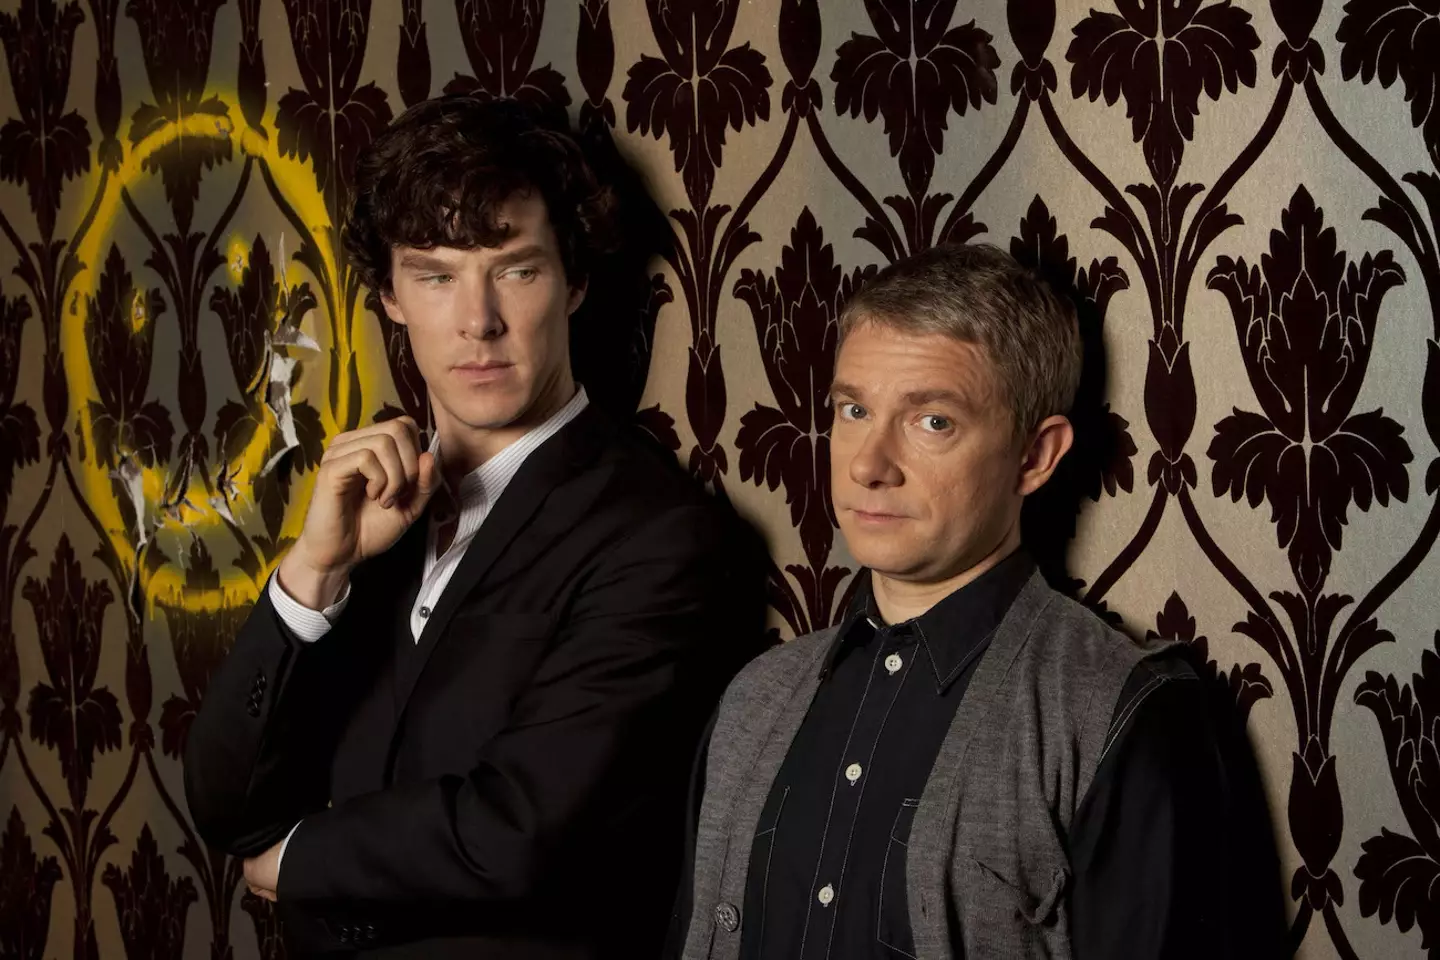 The show ran for a total of 13 episodes between 2010-2017 with Cumberbatch playing the role as Sherlock Holmes and Freeman taking on the part of Dr John Watson.